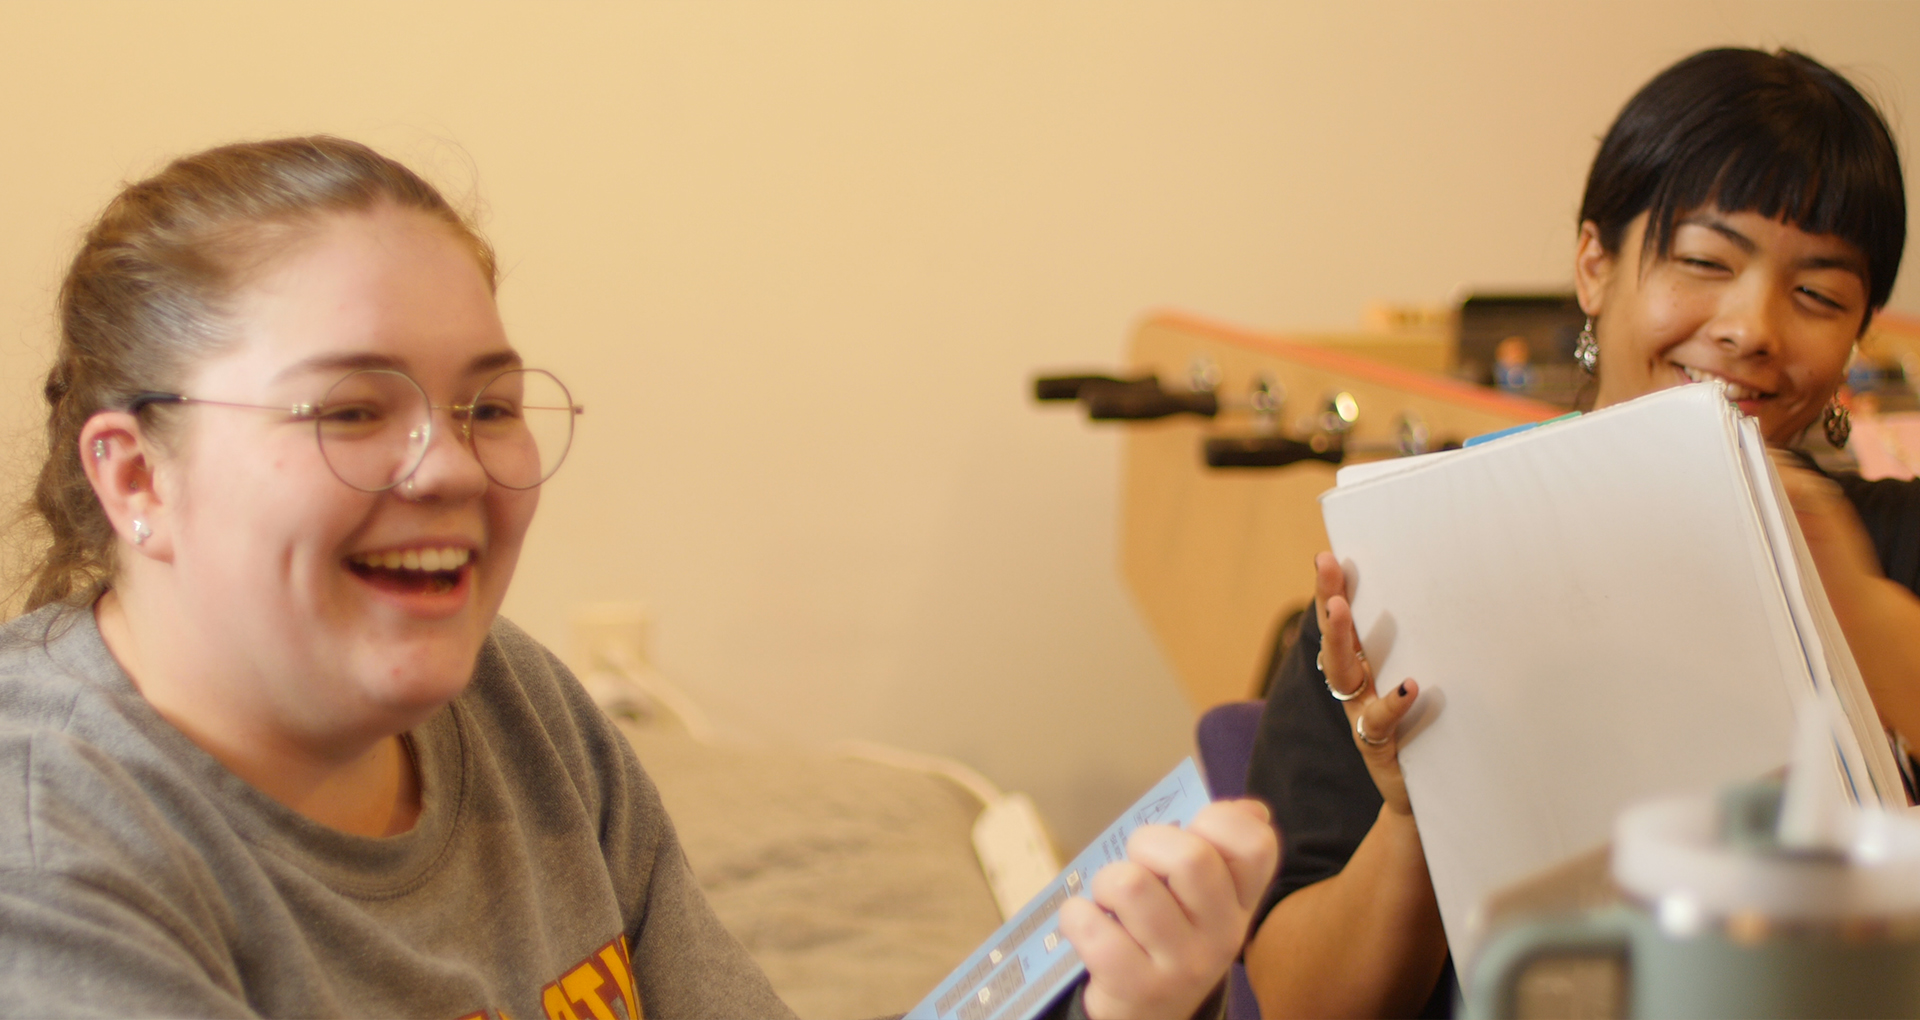 Photo of two teen peer counselors laughing and smiling while working on homework.